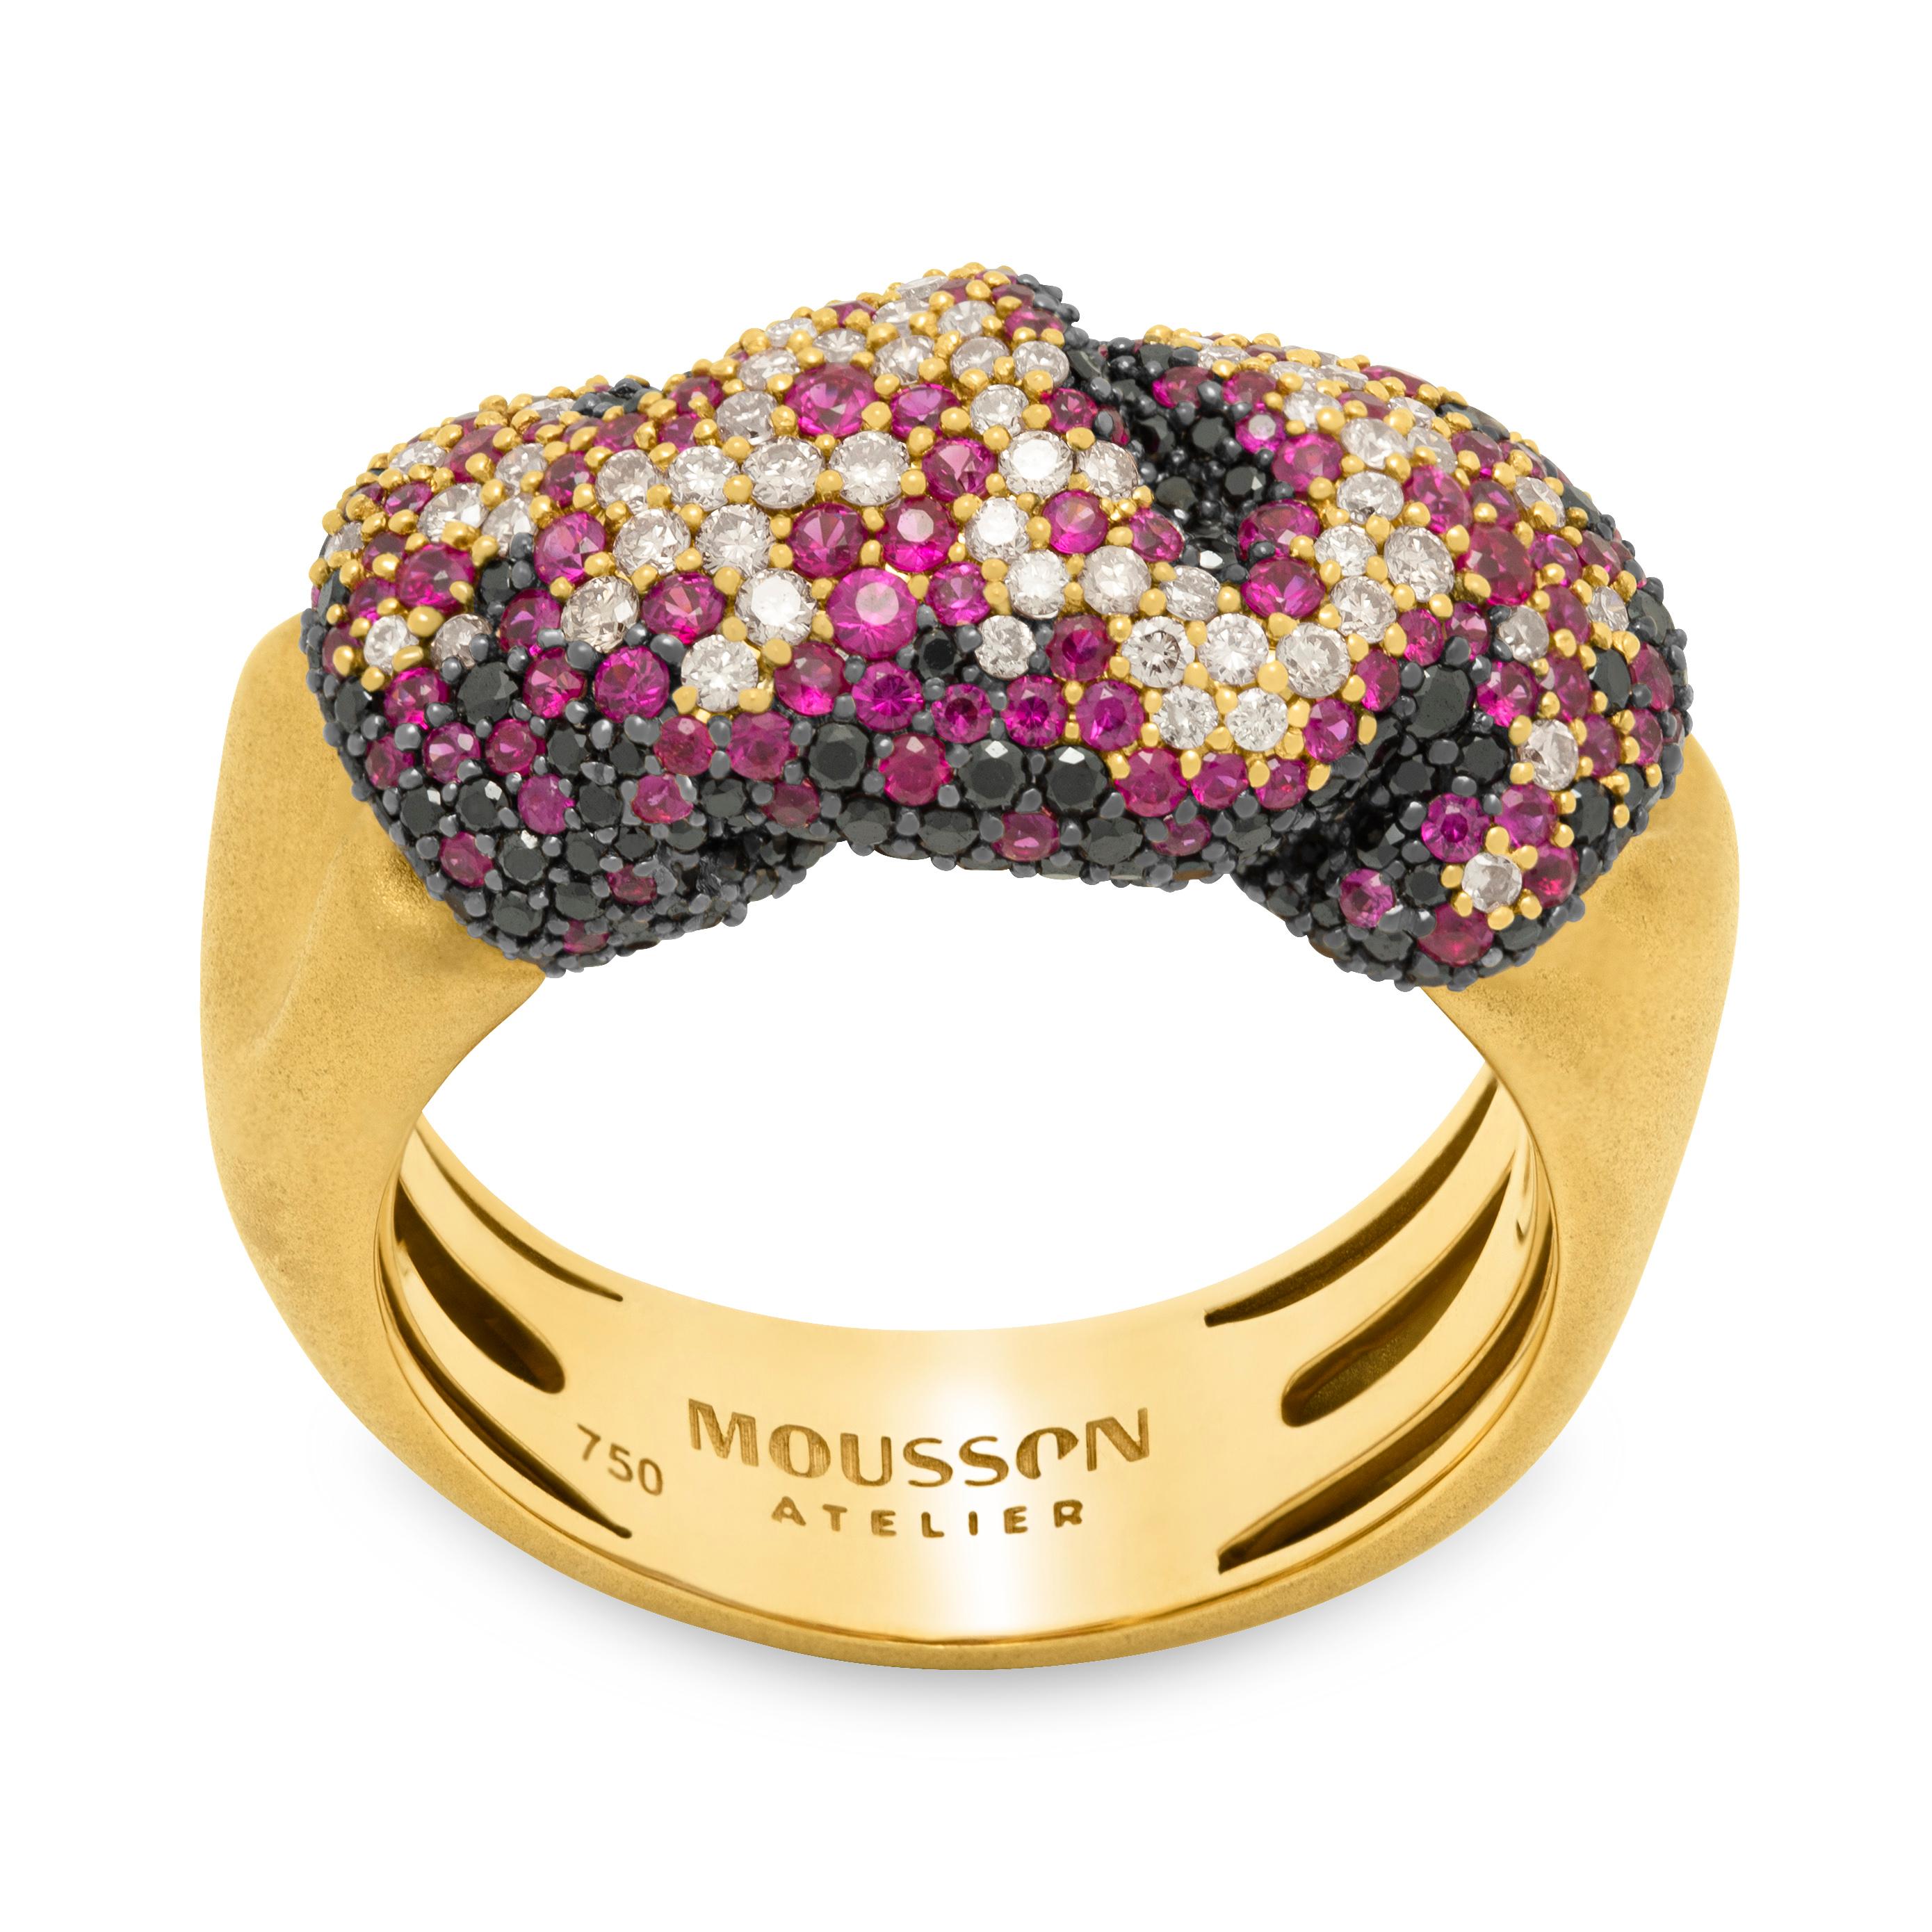 Champagne Diamonds Ruby Black Diamonds 18 Karat Yellow Gold Ring

This exquisite Ring is exquisitely rendered in 18K Matte Yellow Gold, showcasing 243 shimmering Black Diamonds with a total carat weight of 0.75 and 123 deep Red Rubies at 0.64. 62